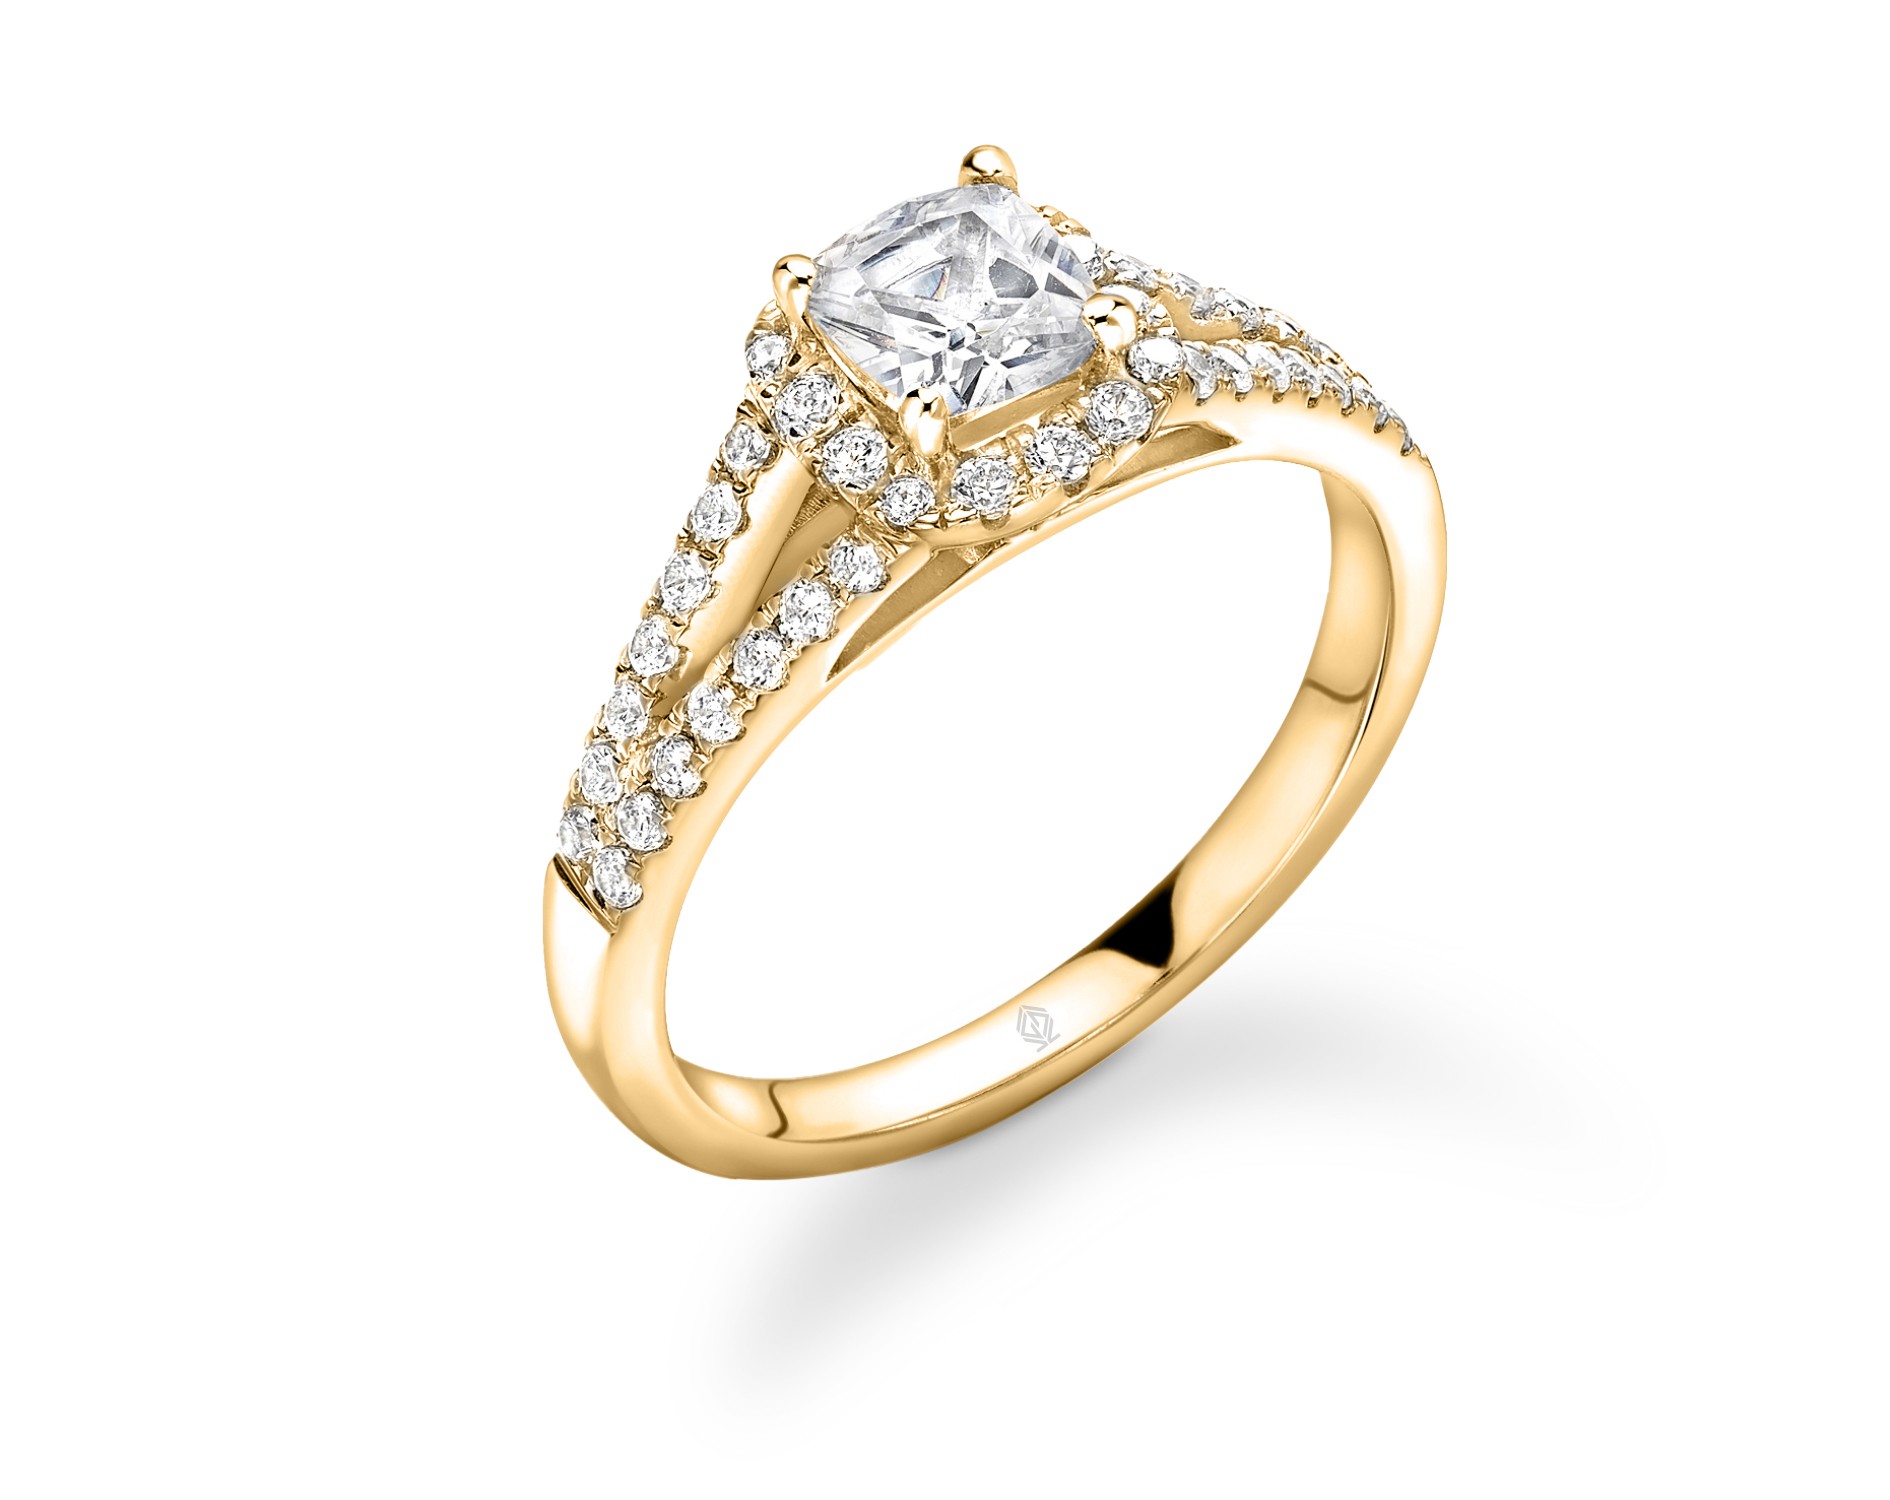 18K YELLOW GOLD CUSHION CUT HALO DIAMOND ENGAGEMENT RING WITH SIDE STONES IN SPLIT SHANK PAVE SET